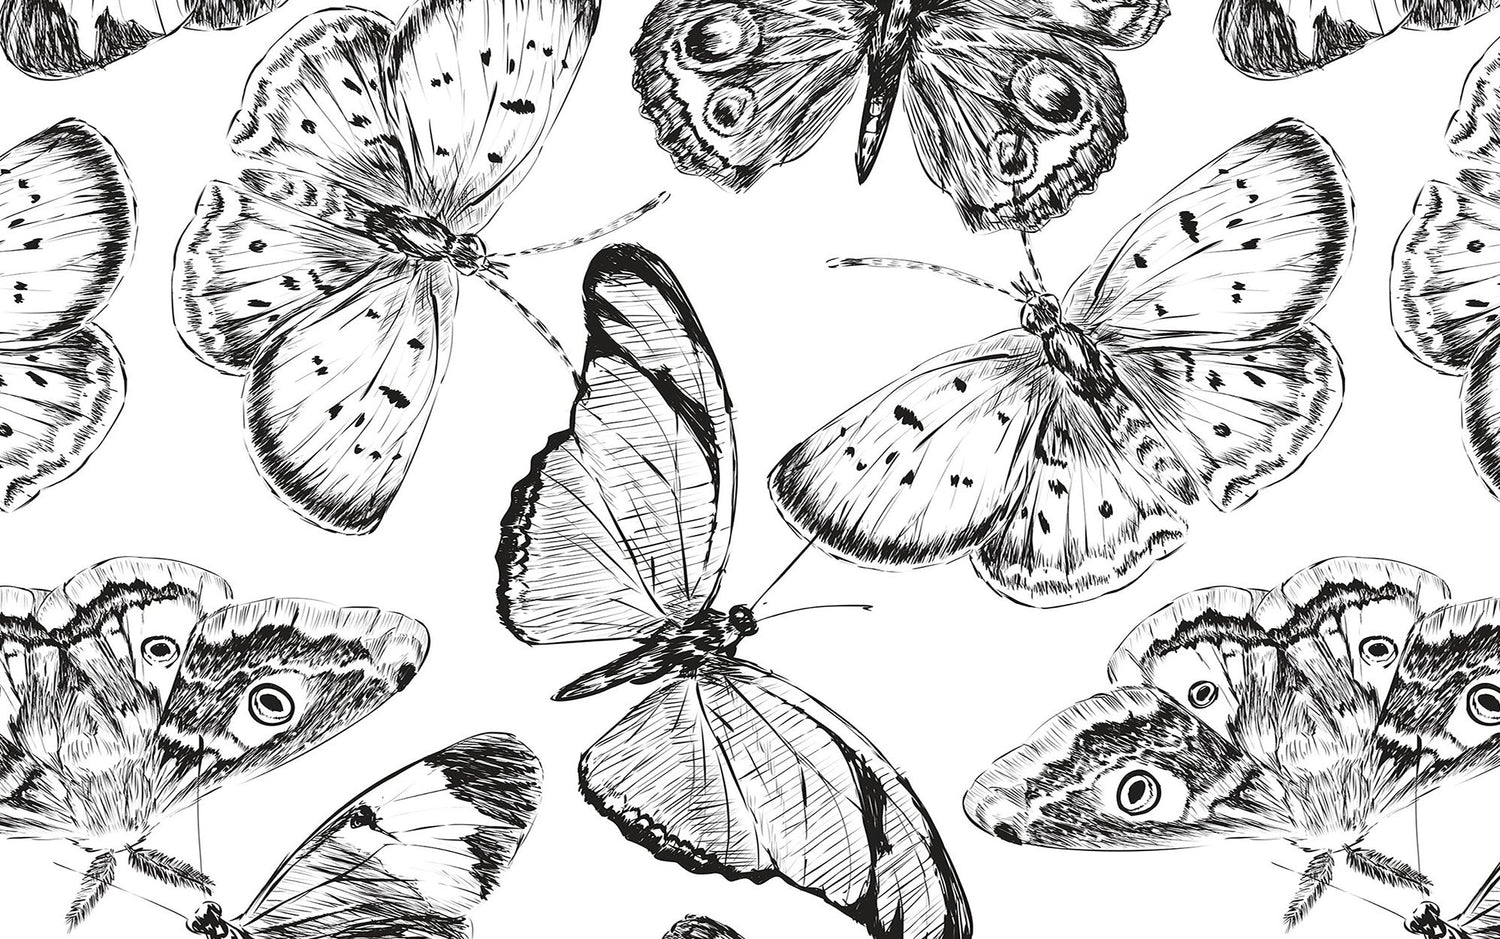 A black and white sketched butterfly mural on a wall interior